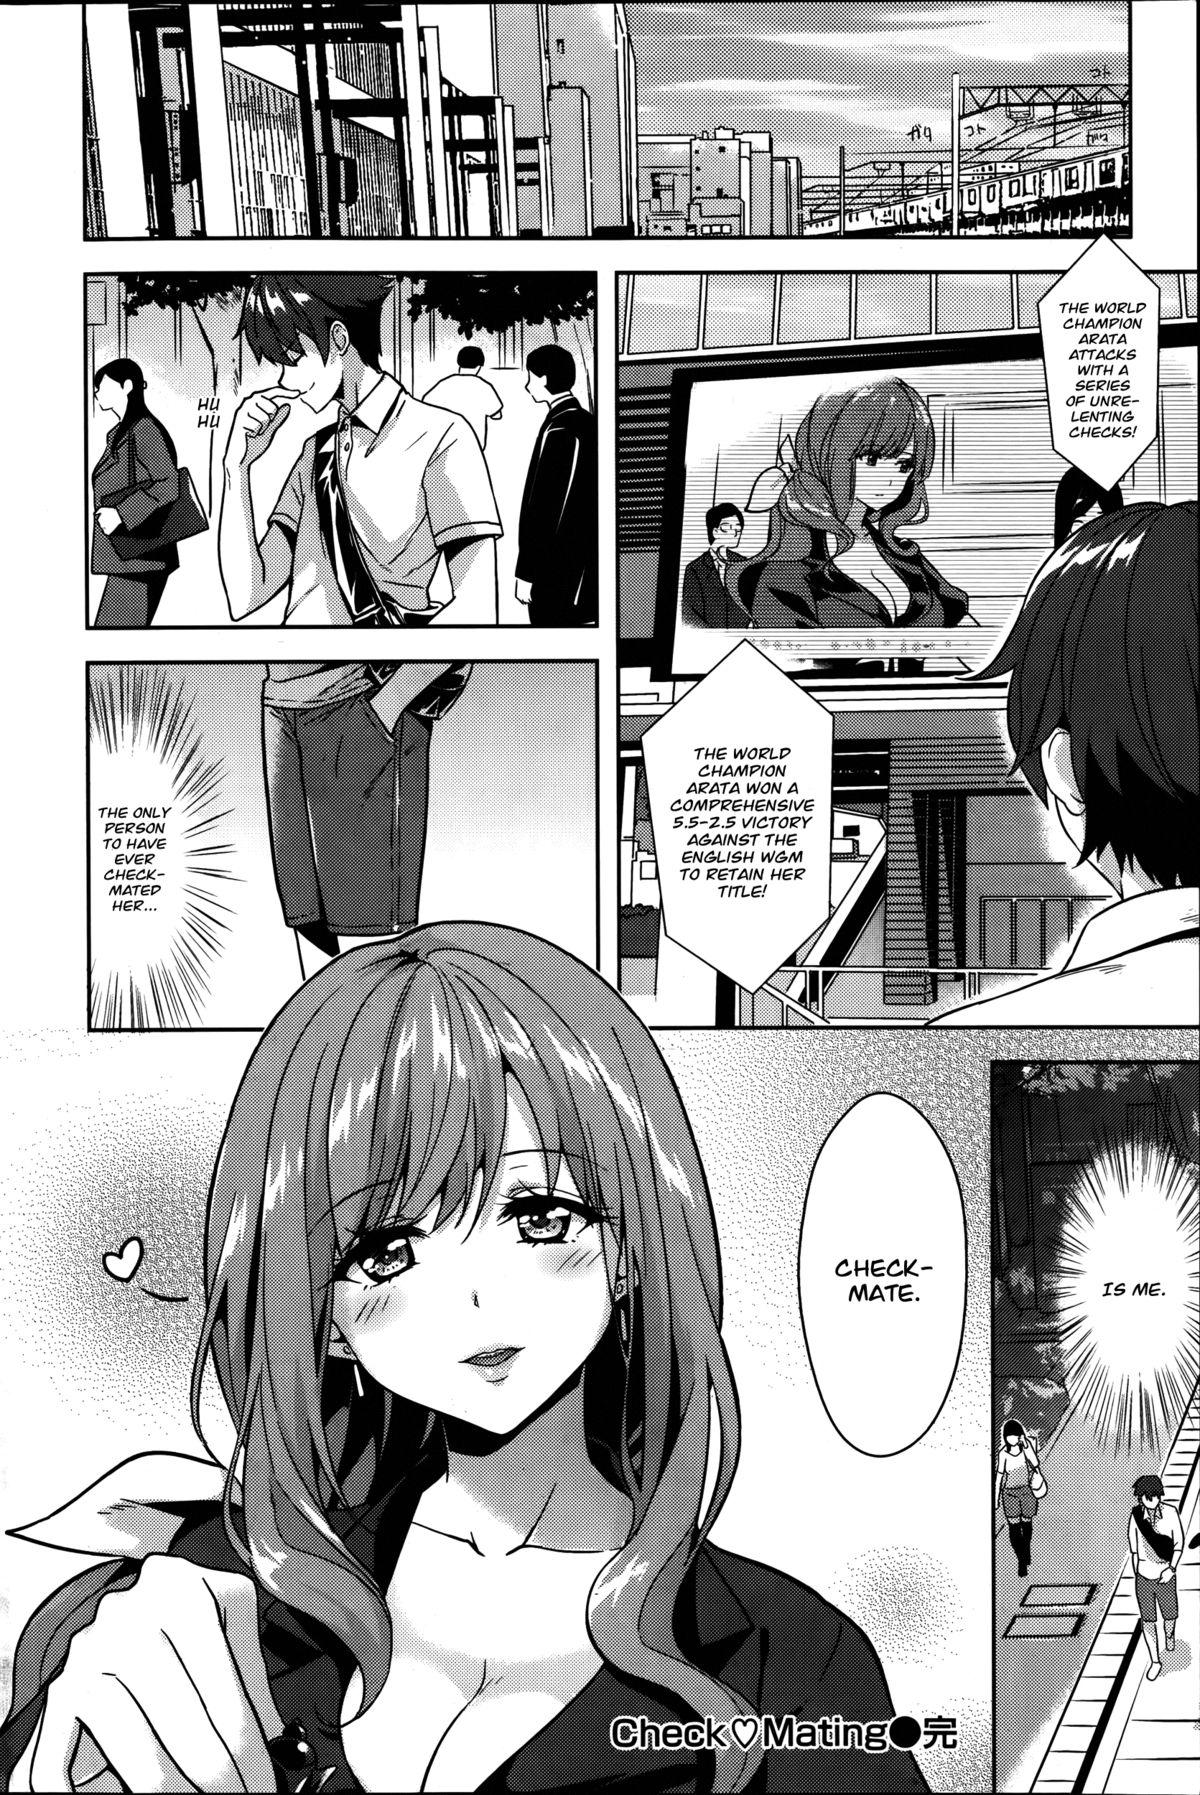 Free Rough Sex Check ♥ Mating Free - Page 20